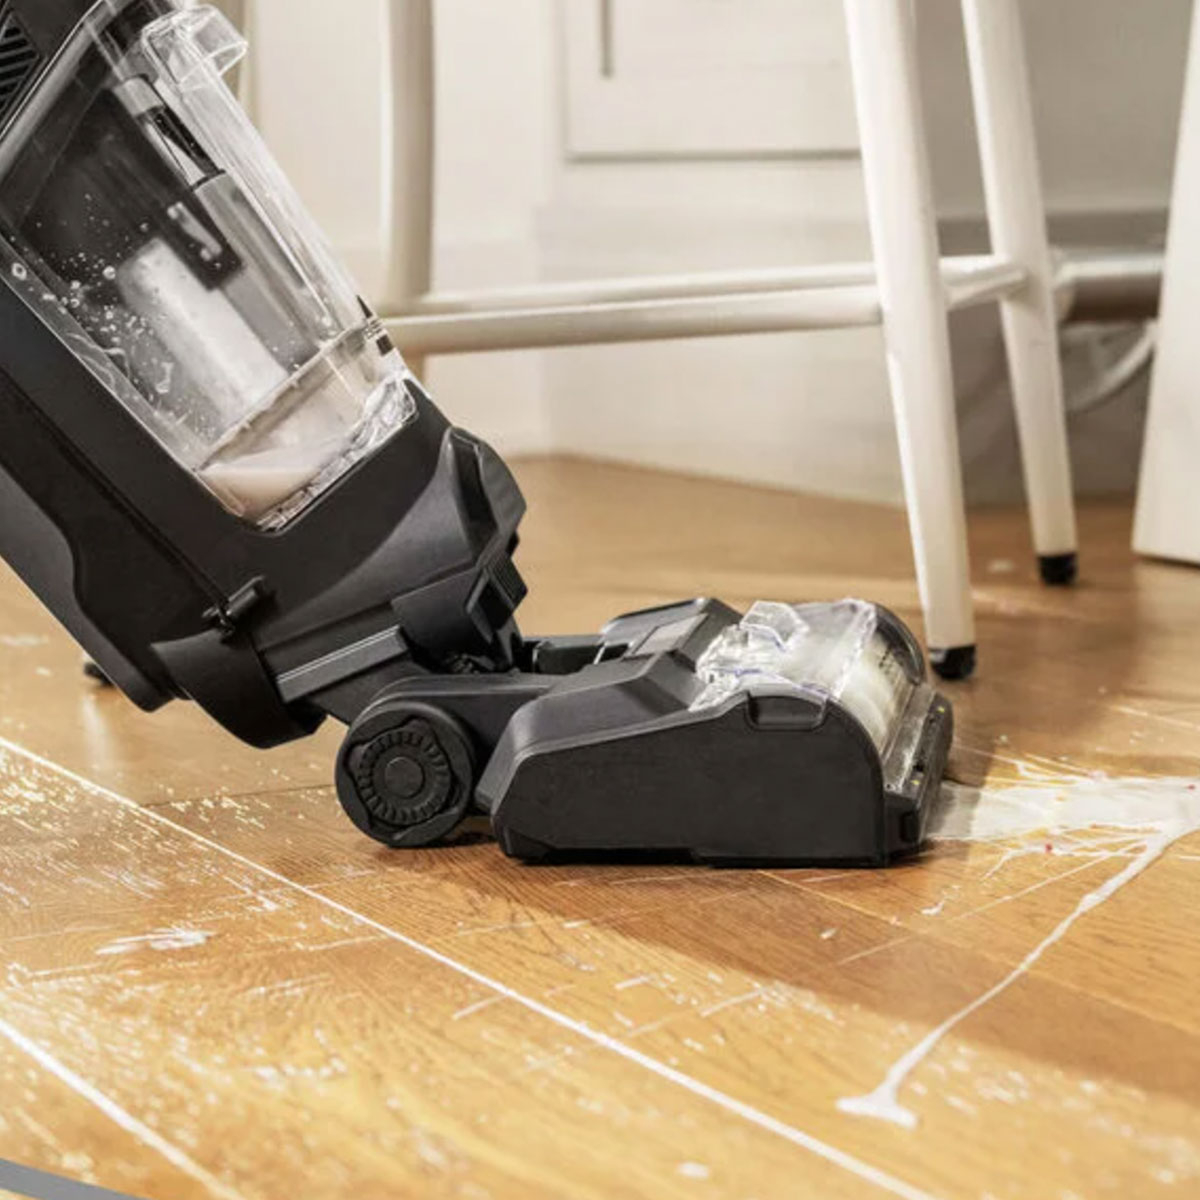 24-Hour Deal: Save $86 on This Bissell 3-In-1 Floor Cleaner